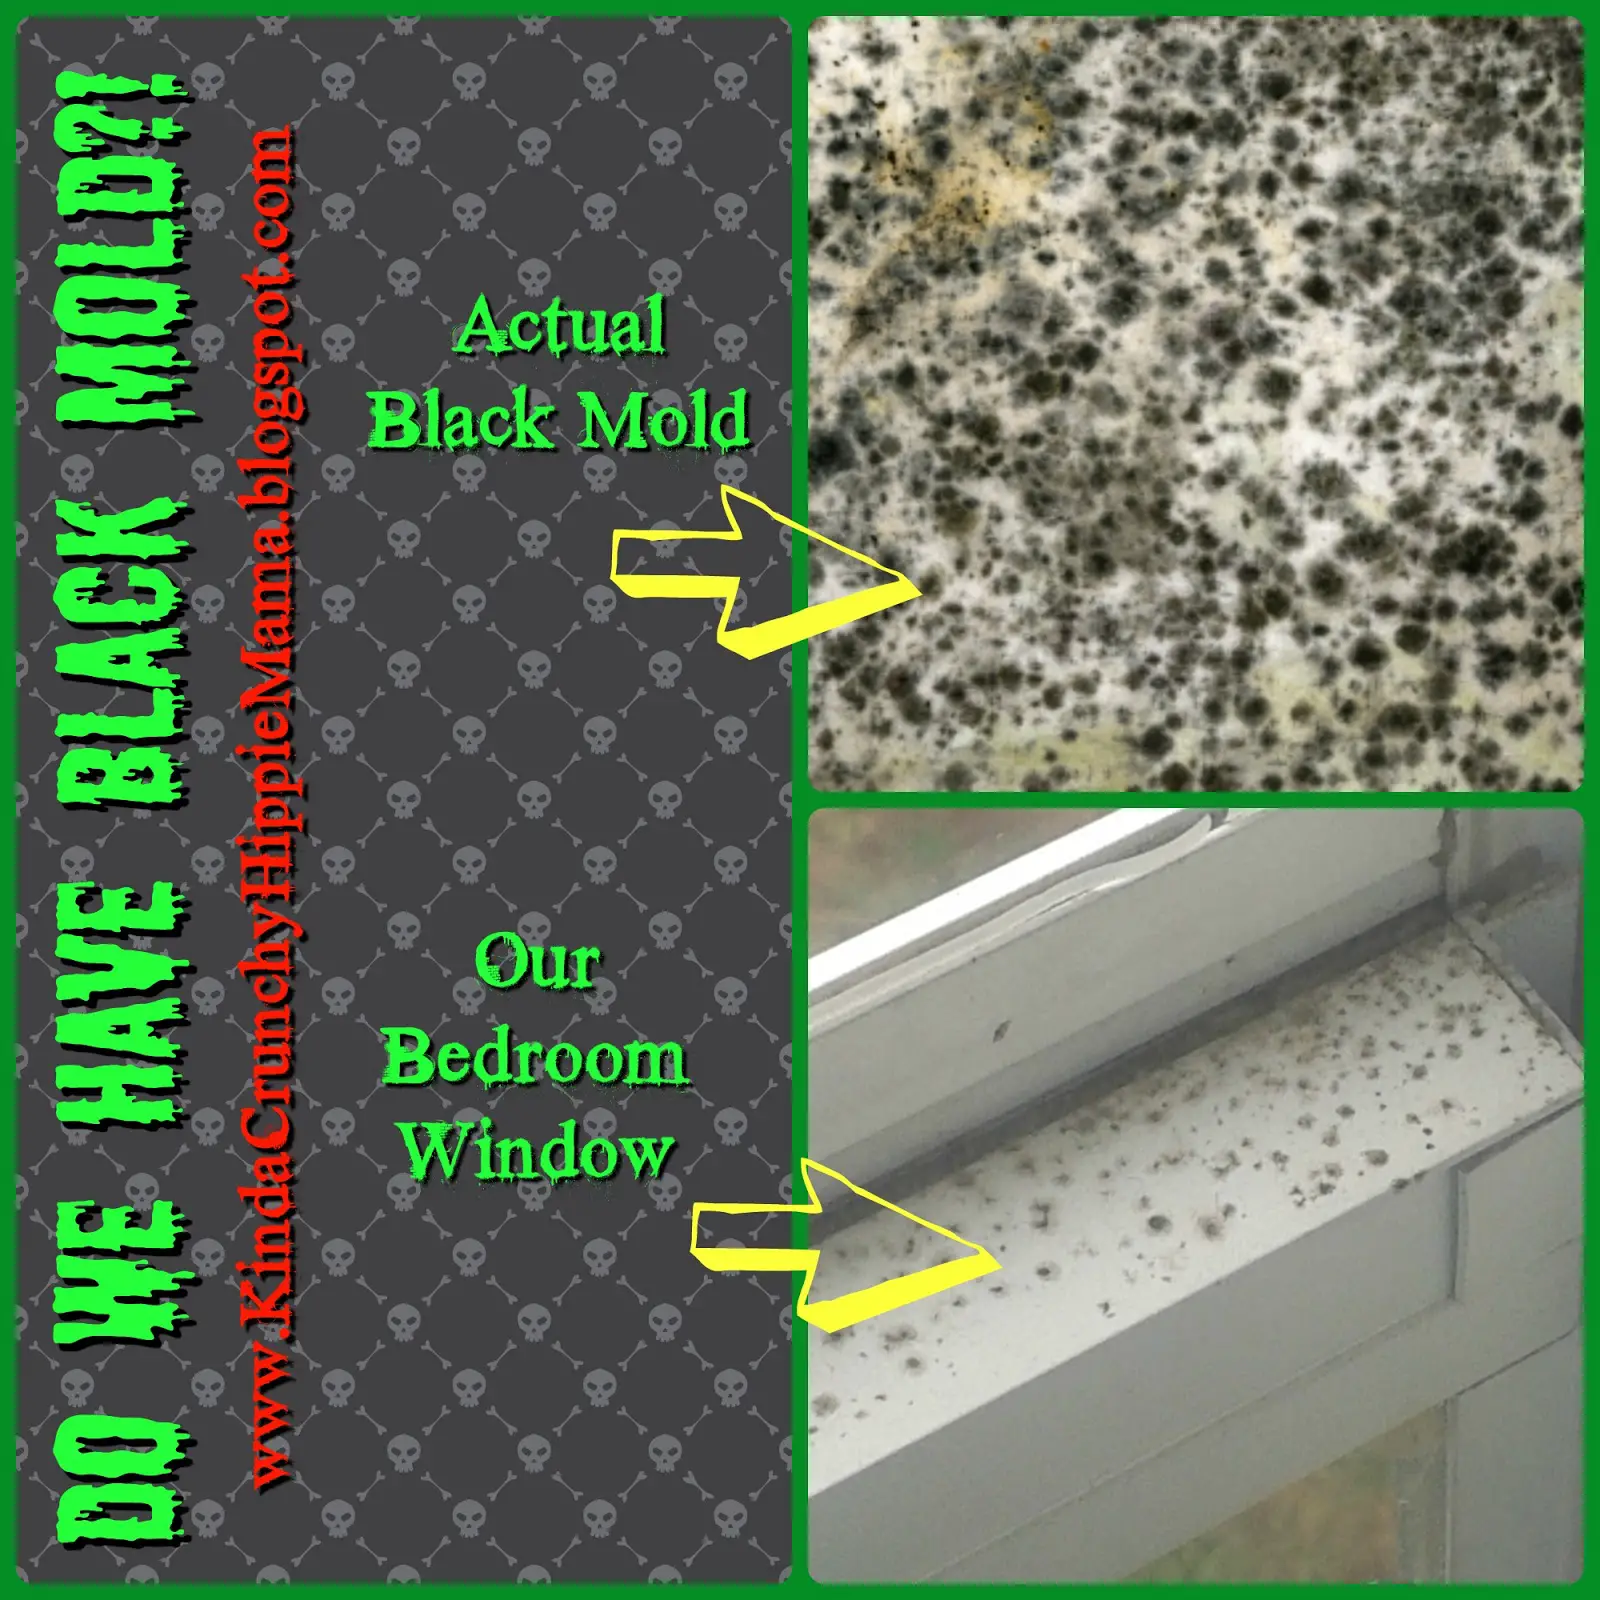 Is It Naptime Yet?: Is Black Mold Hurting Me?!